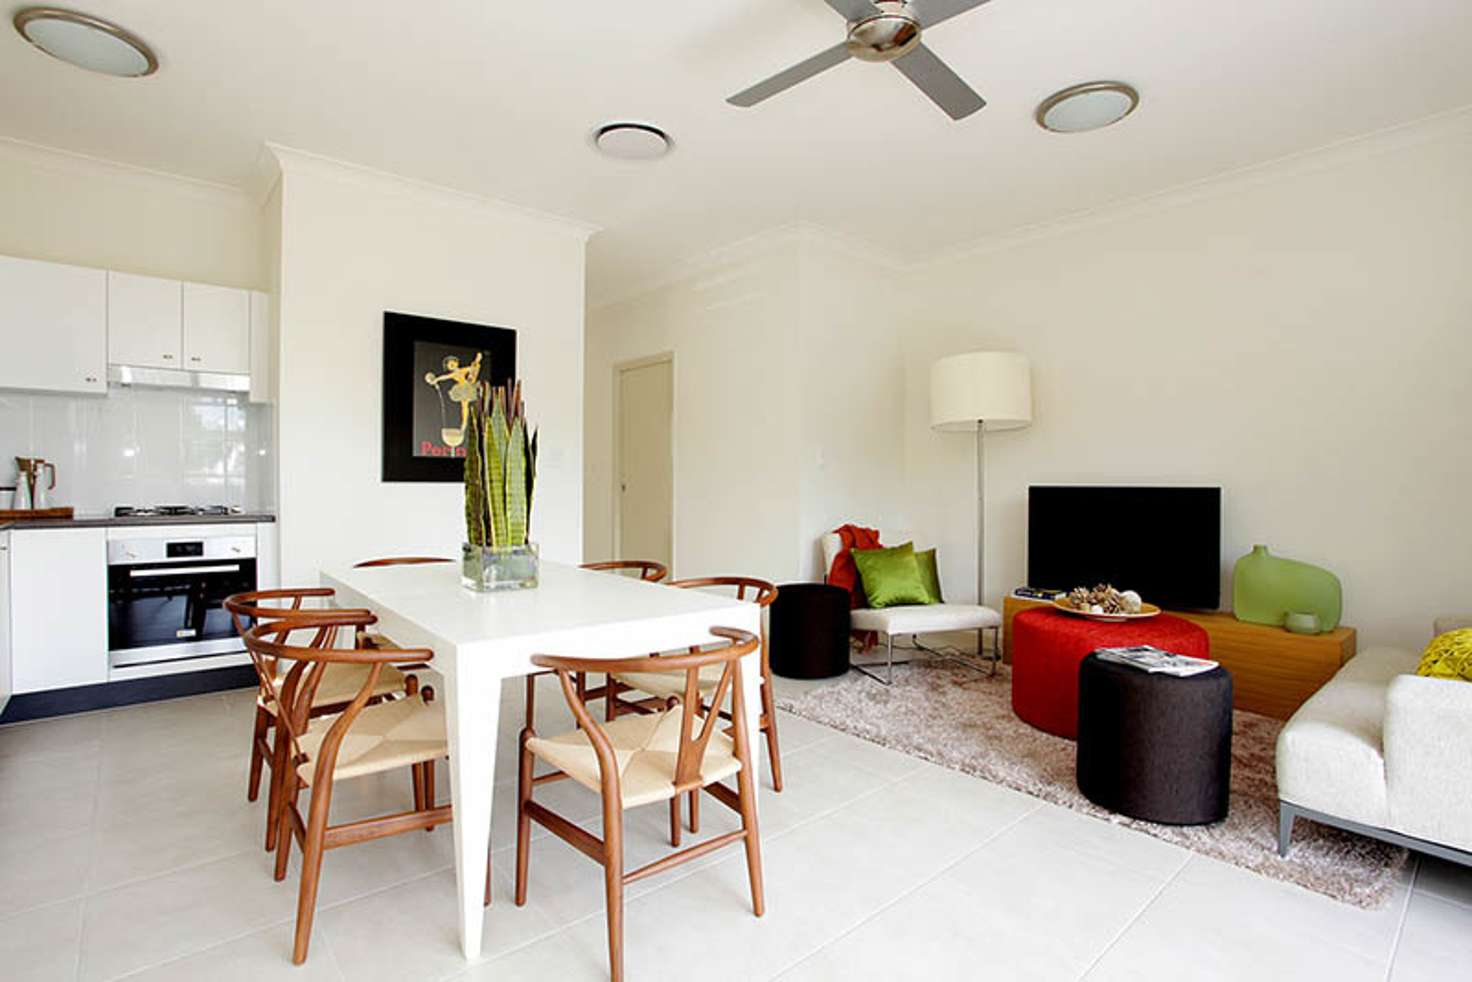 Main view of Homely townhouse listing, 80-82 Lawson St, Morningside QLD 4170